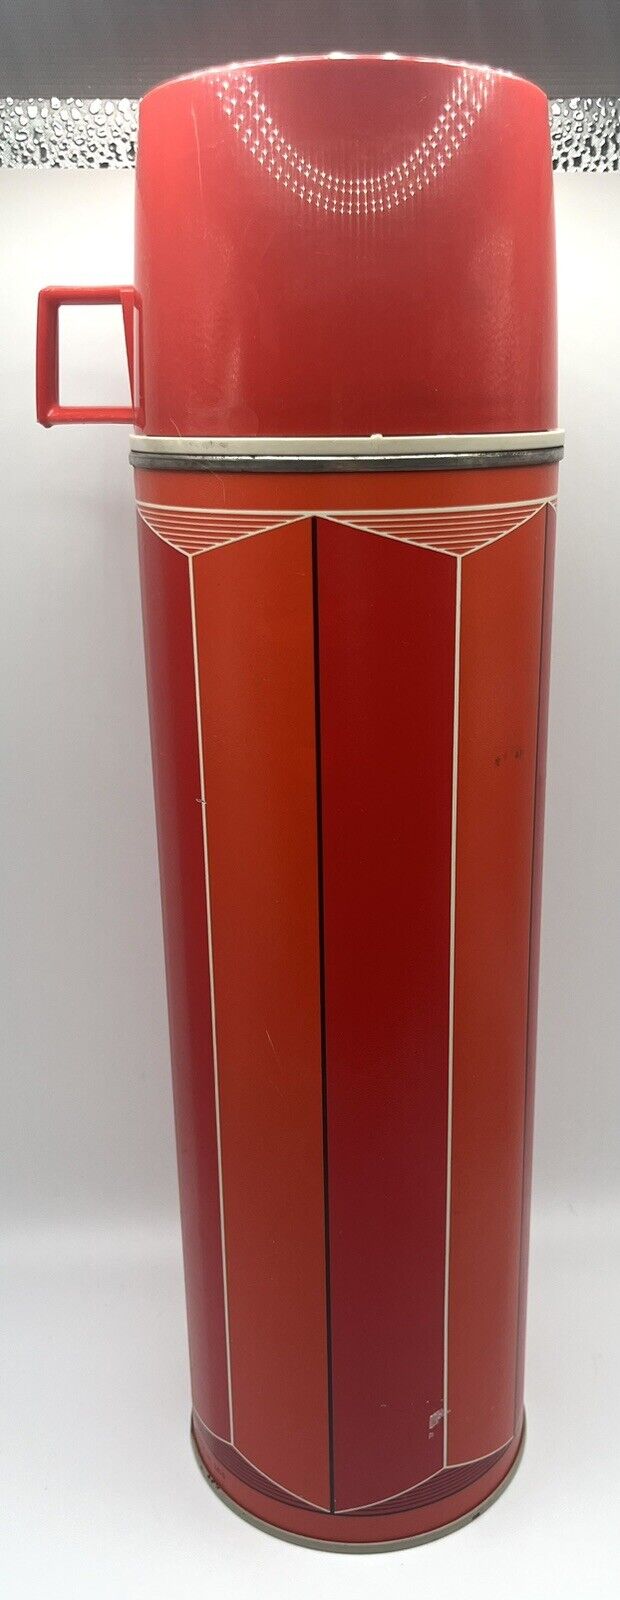 Vintage 1974 King-Seeley Thermos #2410 Red Orange Metal USA Large Tall Hot Cold